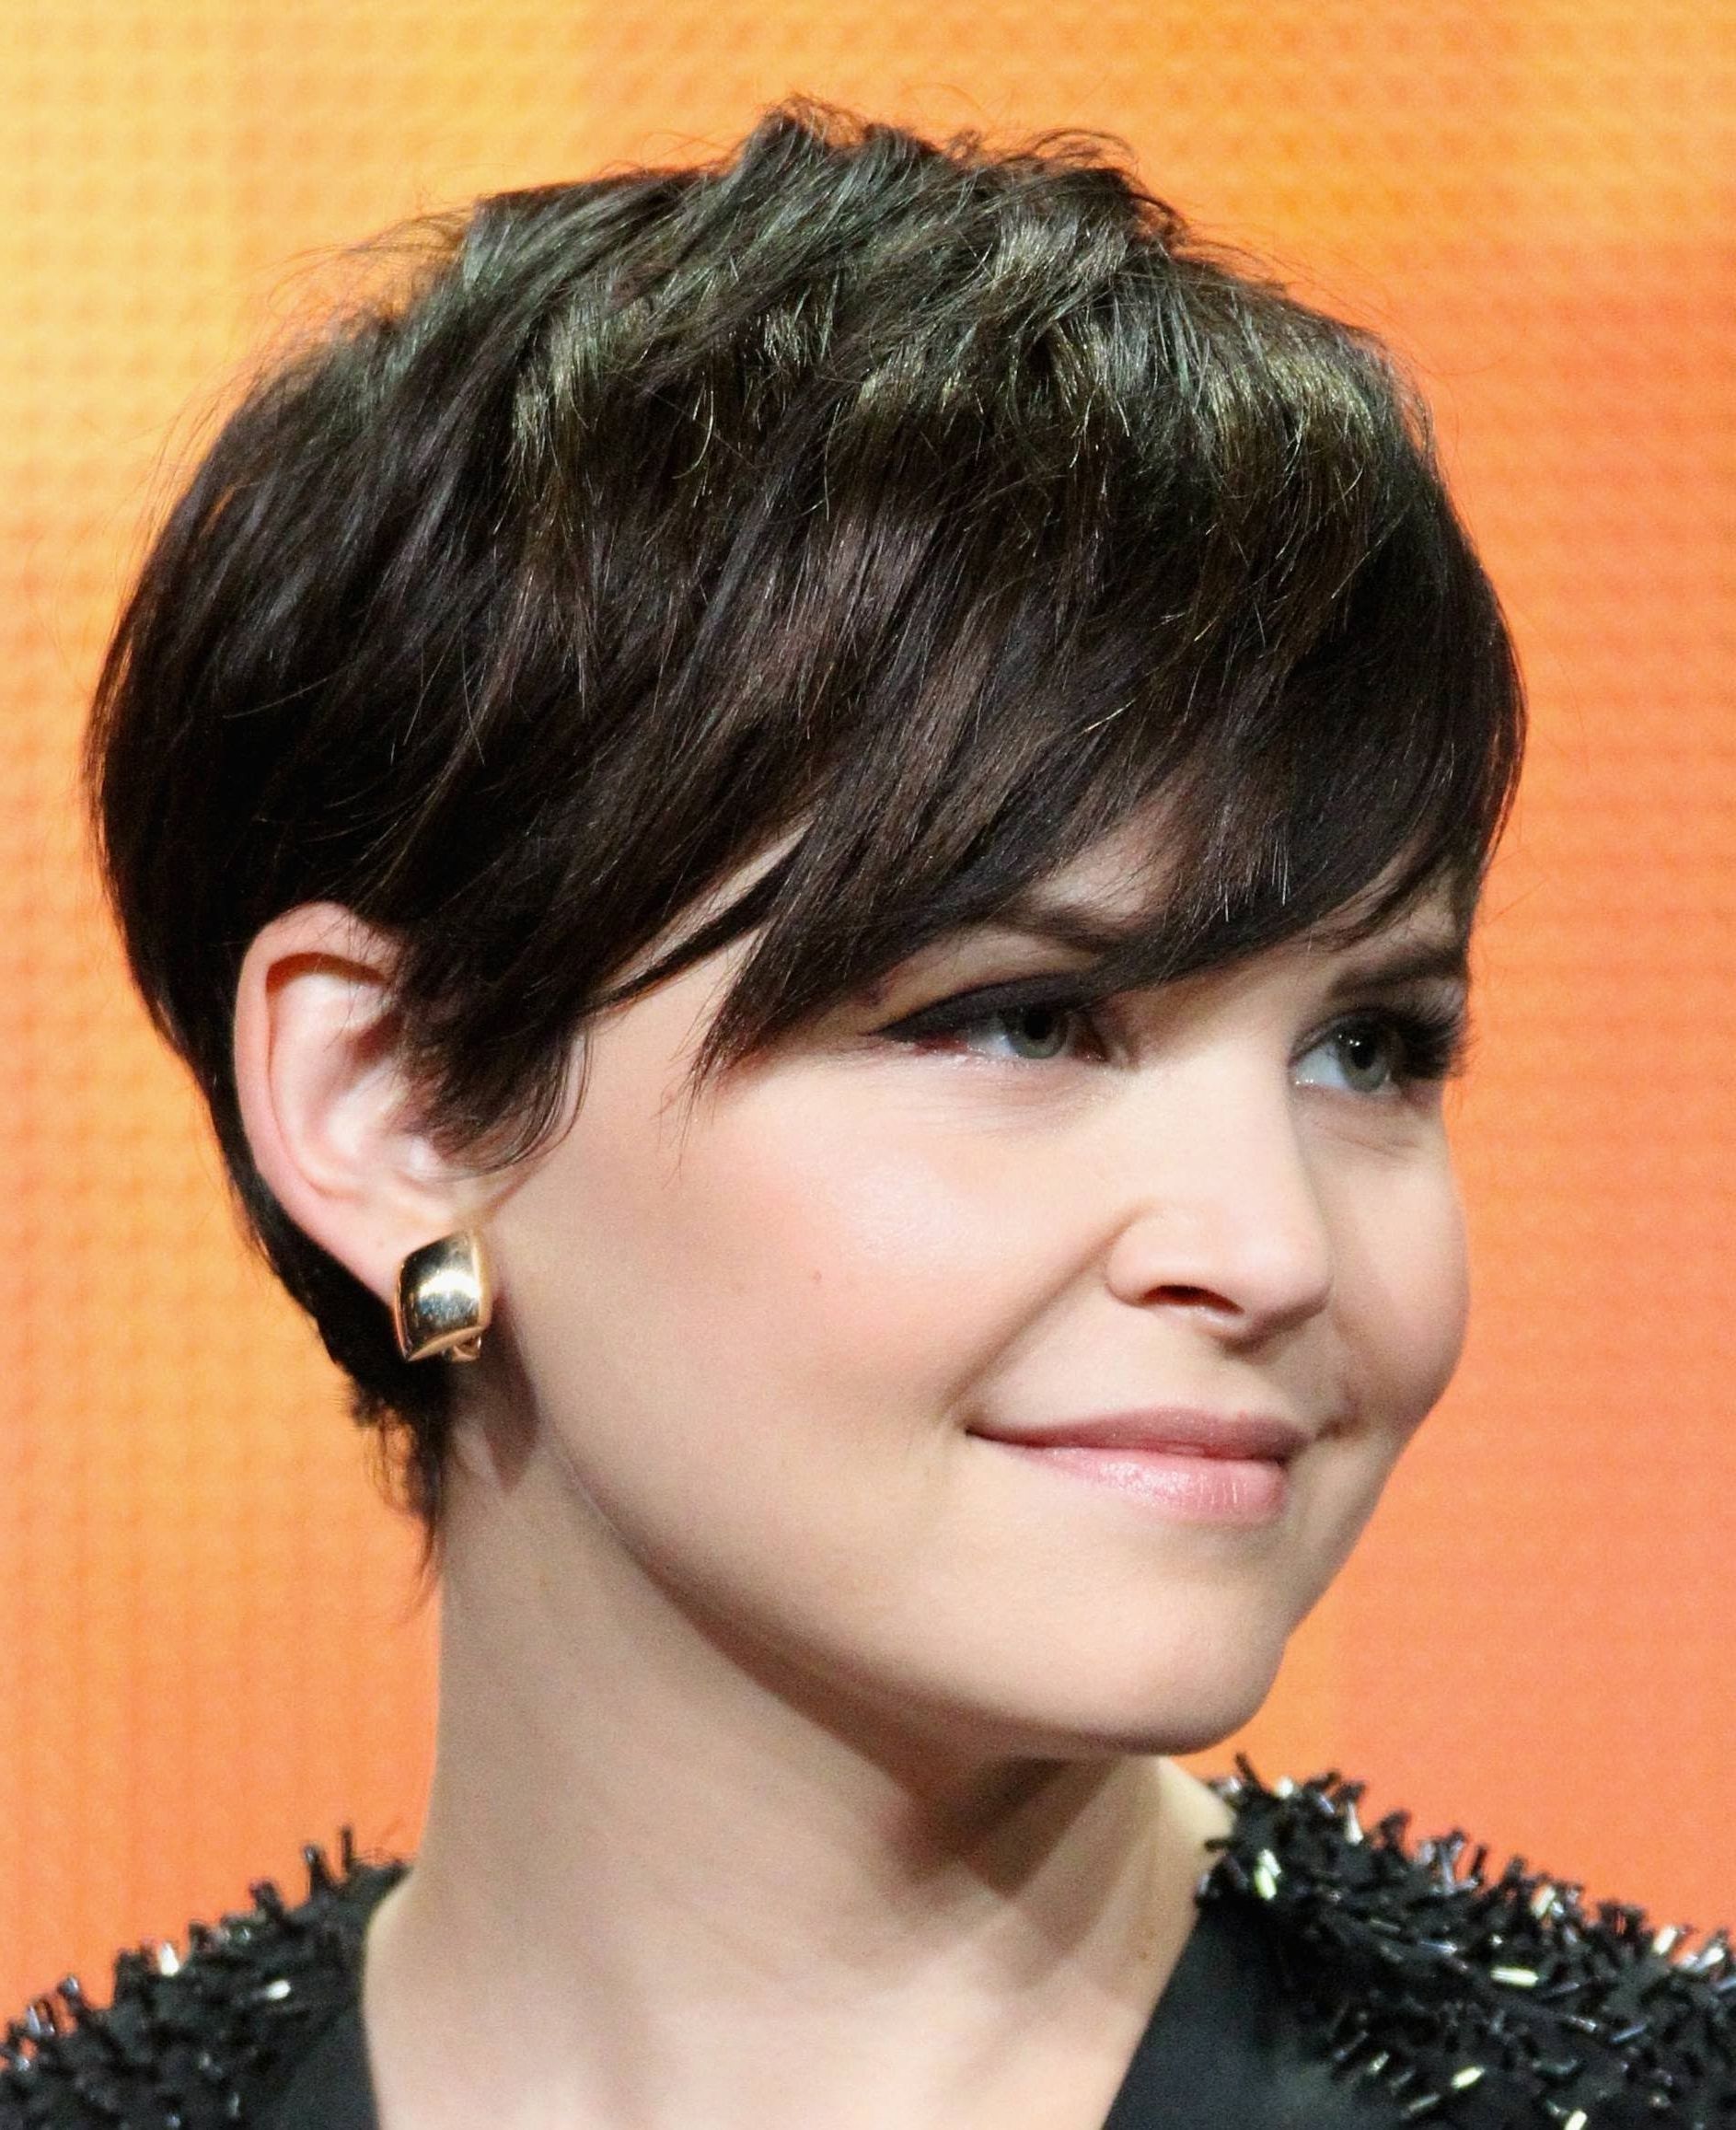 Pixie Haircut | The Ultimate Pixie Cuts Guide Within Most Recent Long Voluminous Pixie Haircuts (View 6 of 15)